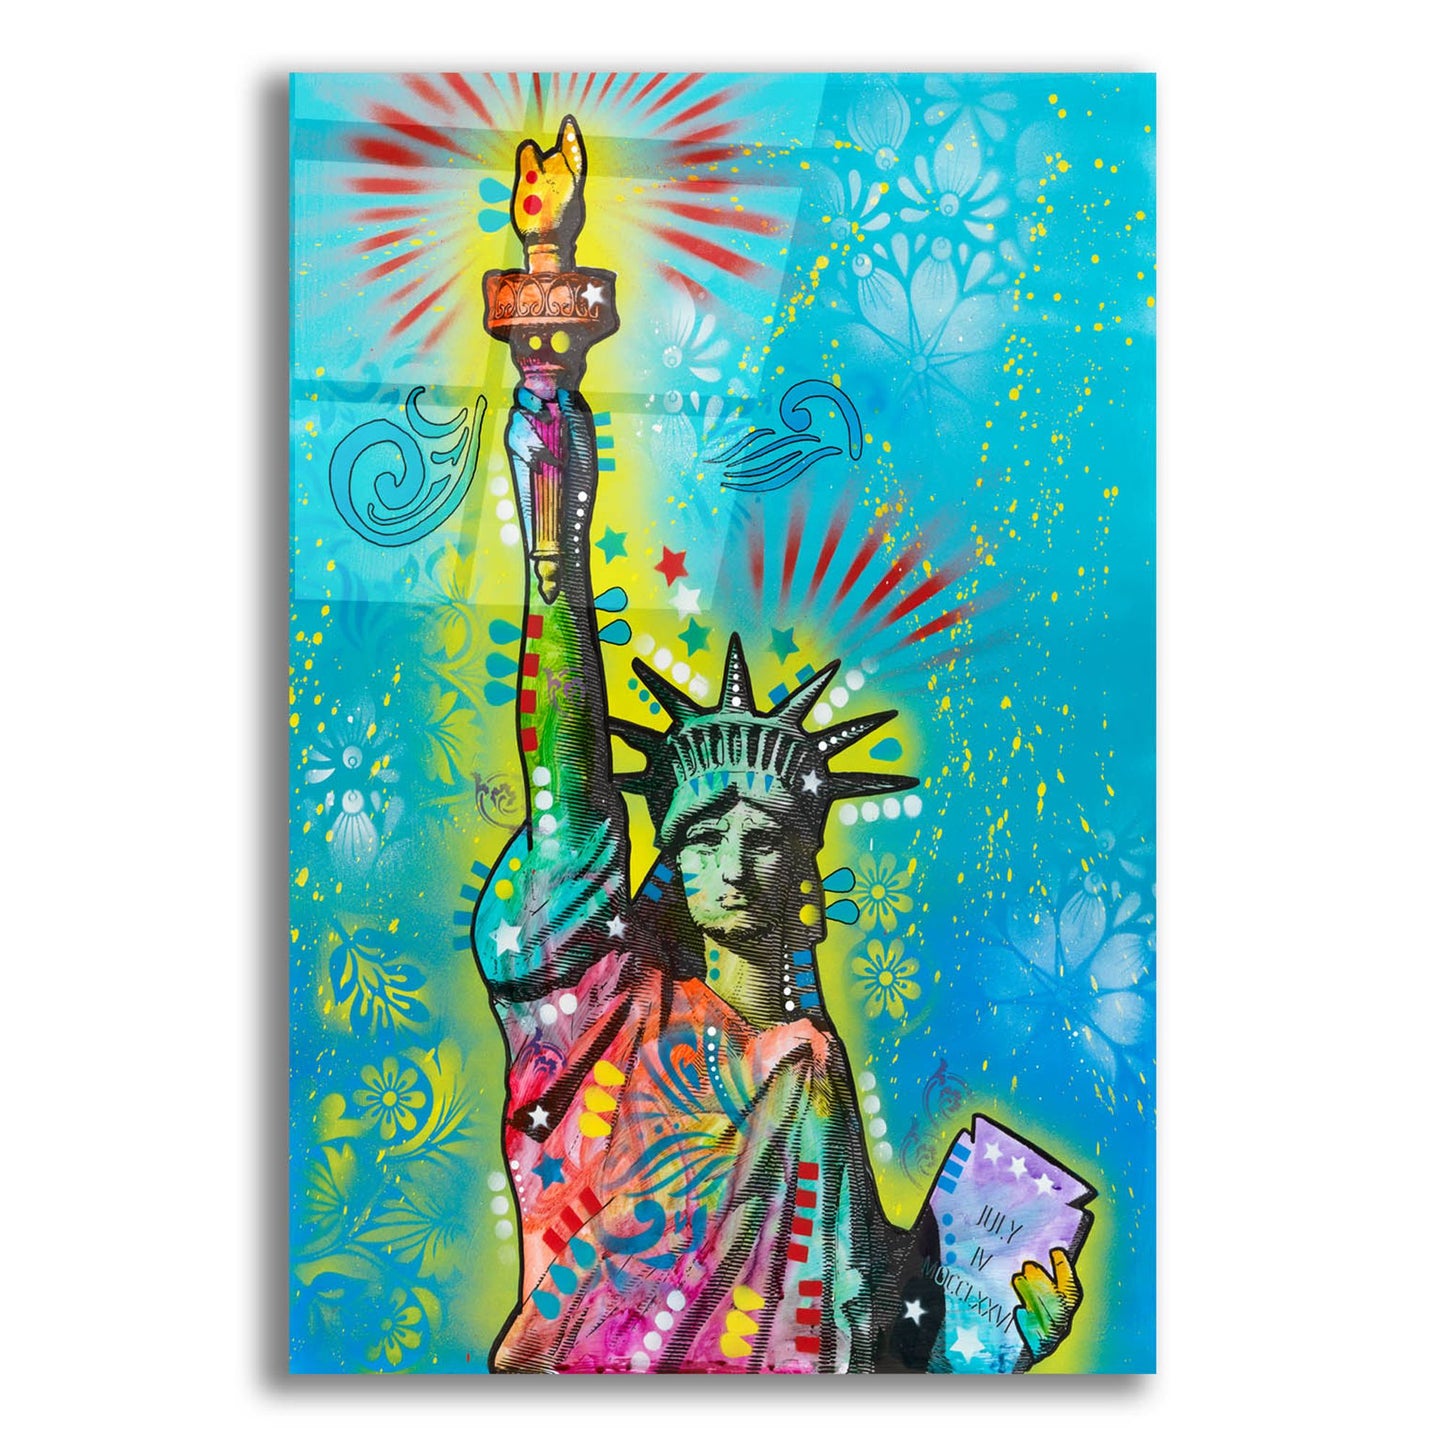 Epic Art 'Lady Liberty' by Dean Russo, Acrylic Glass Wall Art